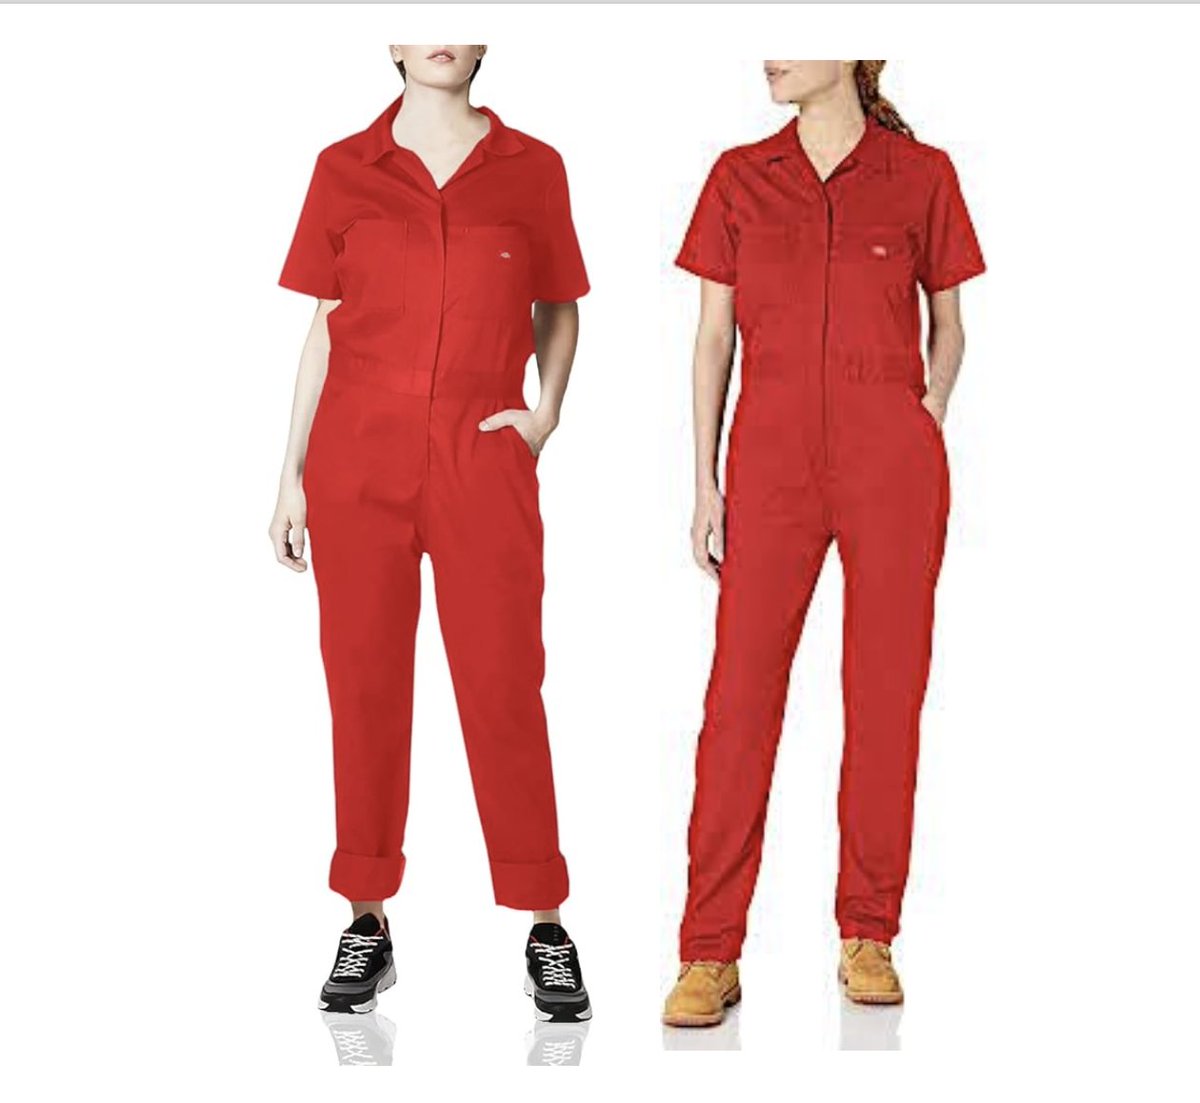 Well, @deanismybuddy nabbed those Harper coveralls up real fast! BUT here's the best consolation prize , I have a red pair waiting to be Duela-fyed. The May Nickel - Duela Edit - Red Dickies etsy.me/4cRozJ0 via @Etsy #Gothamknights #cwgothamknights